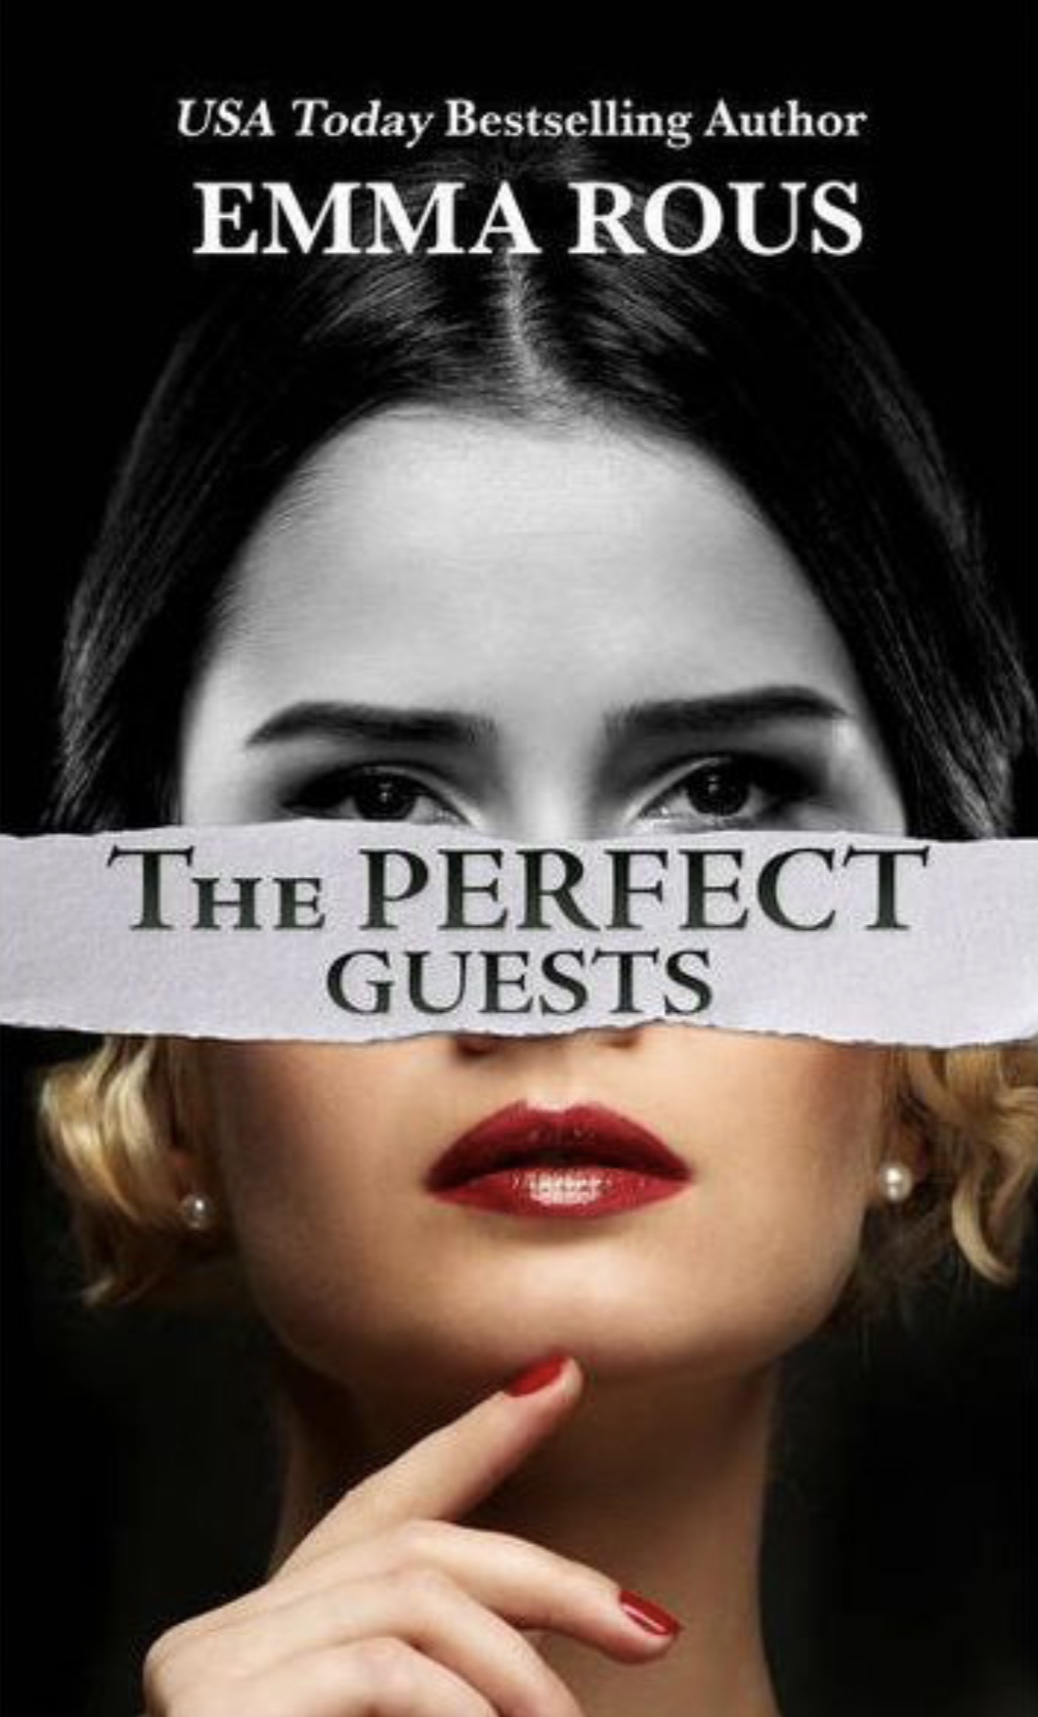 Jacket for 'The Perfecy Guests'